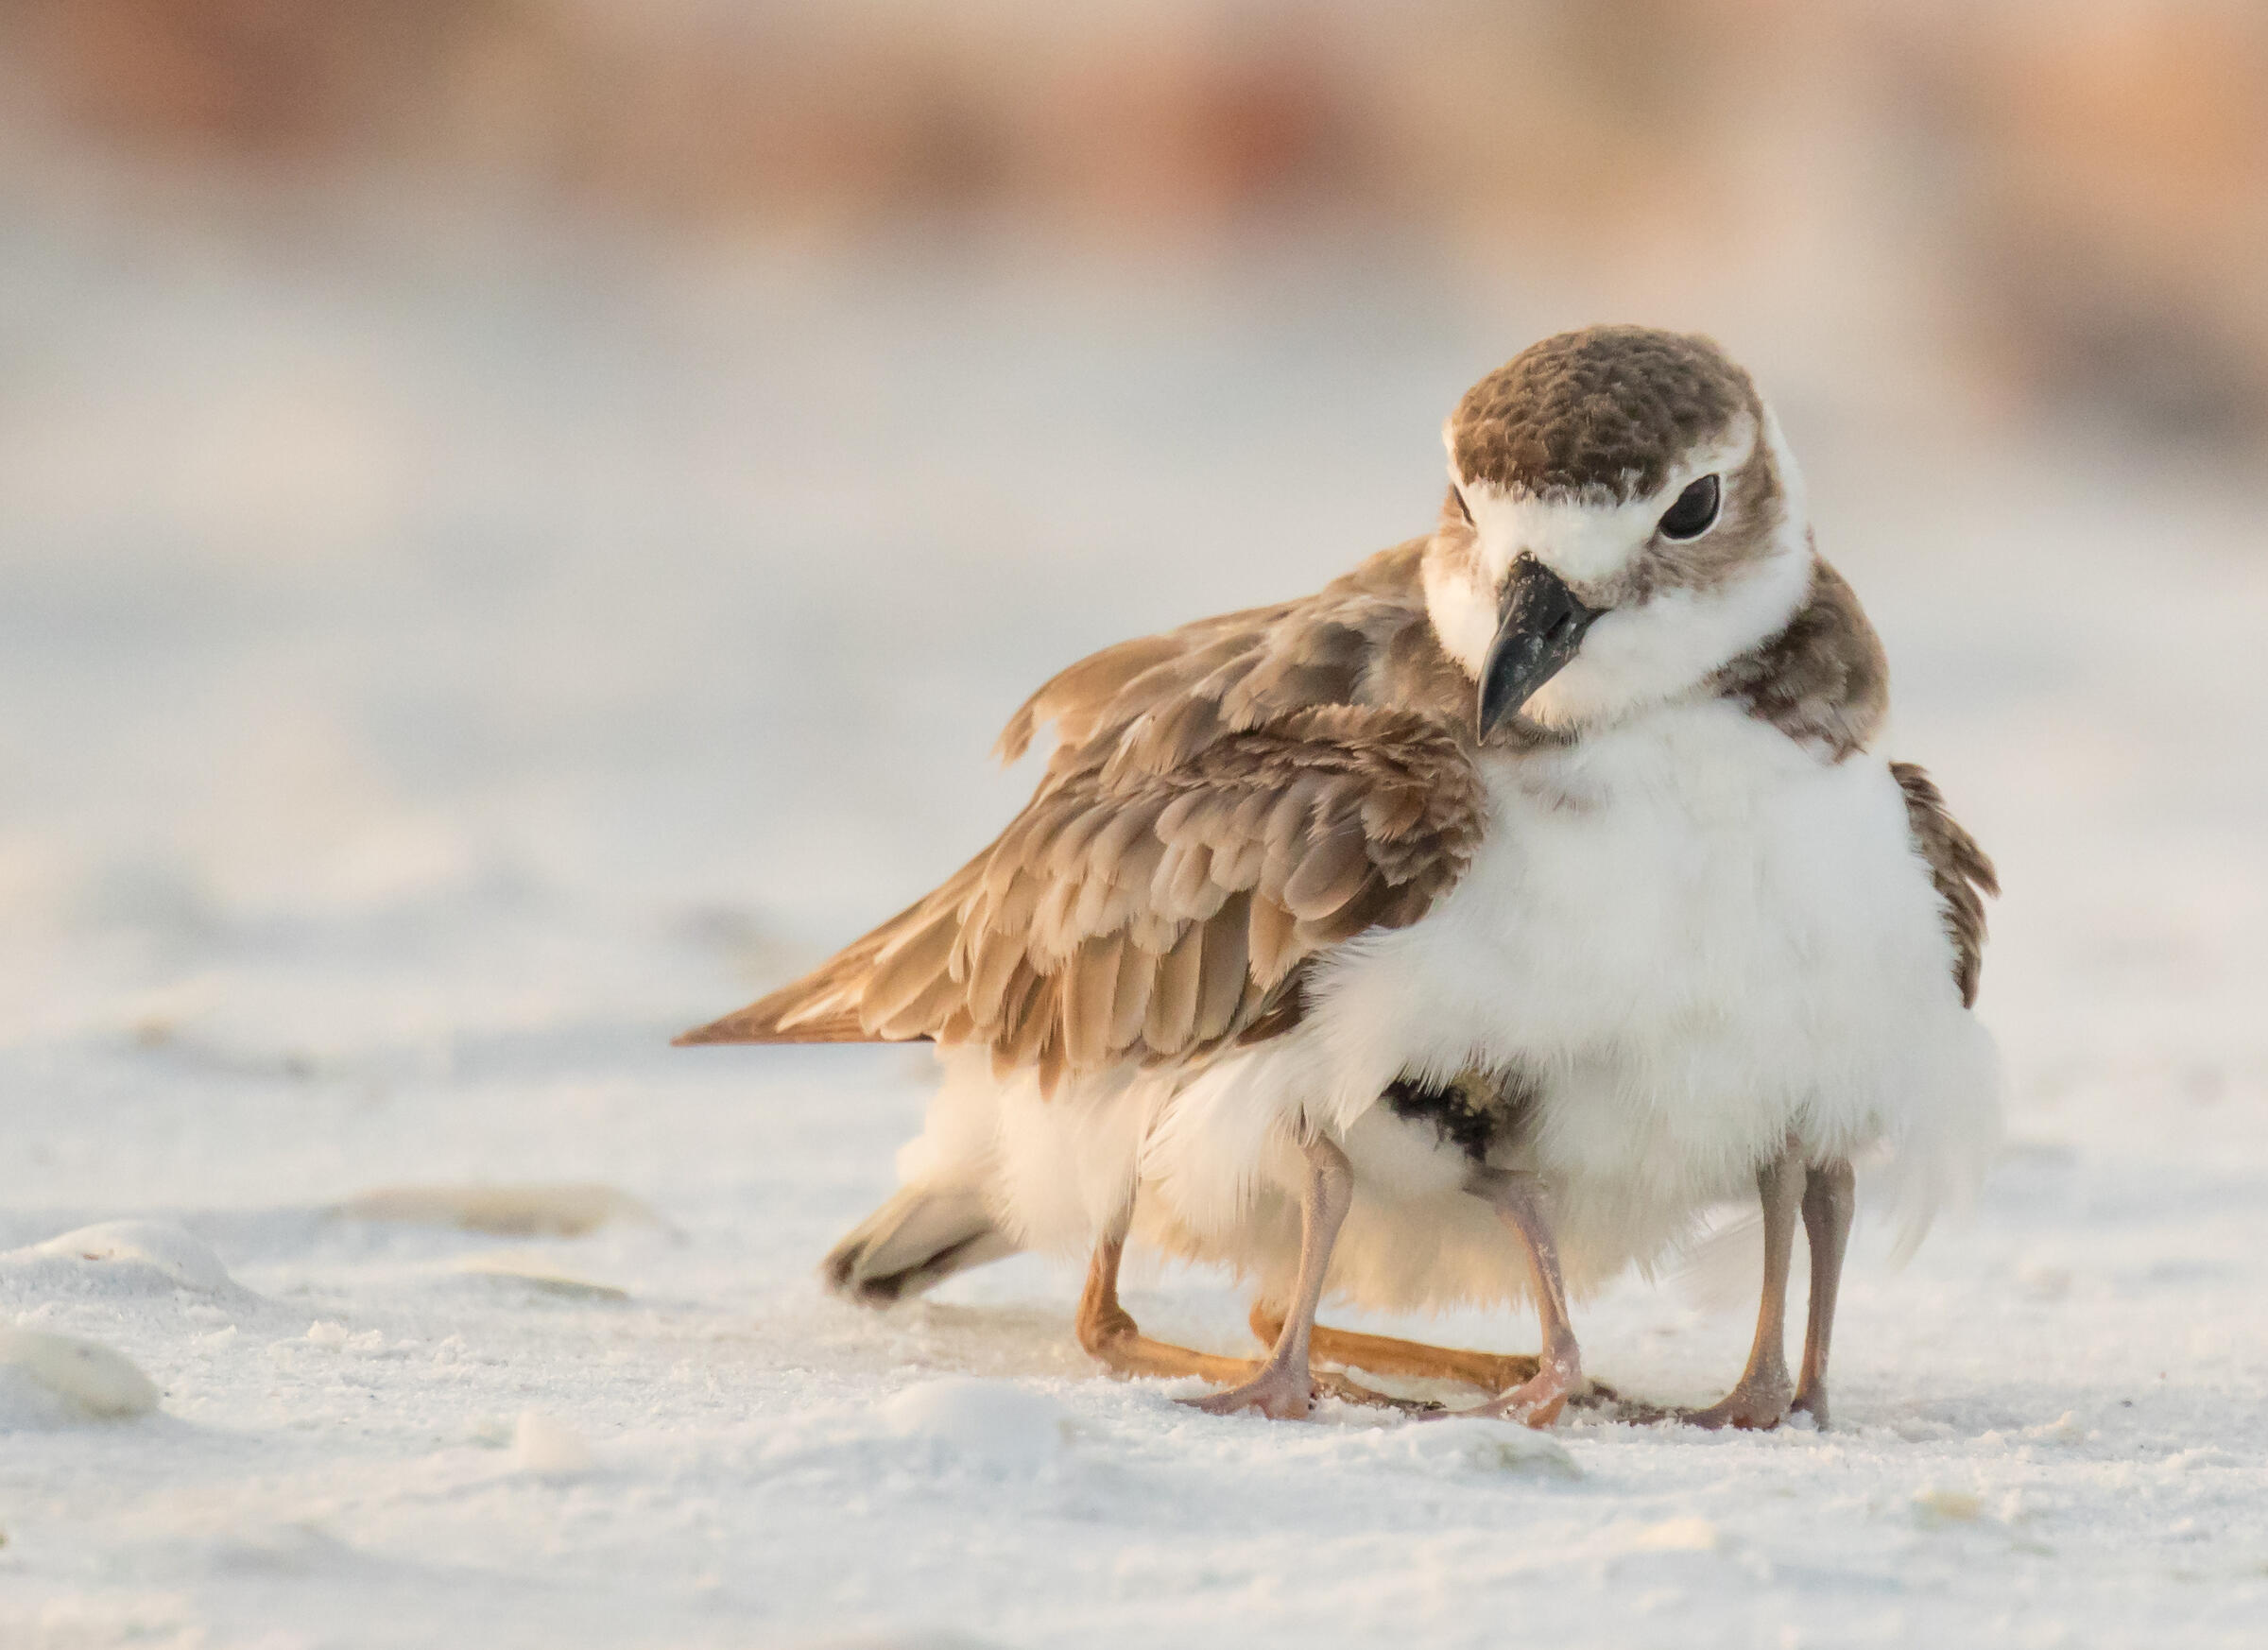 Bird with young on a beach